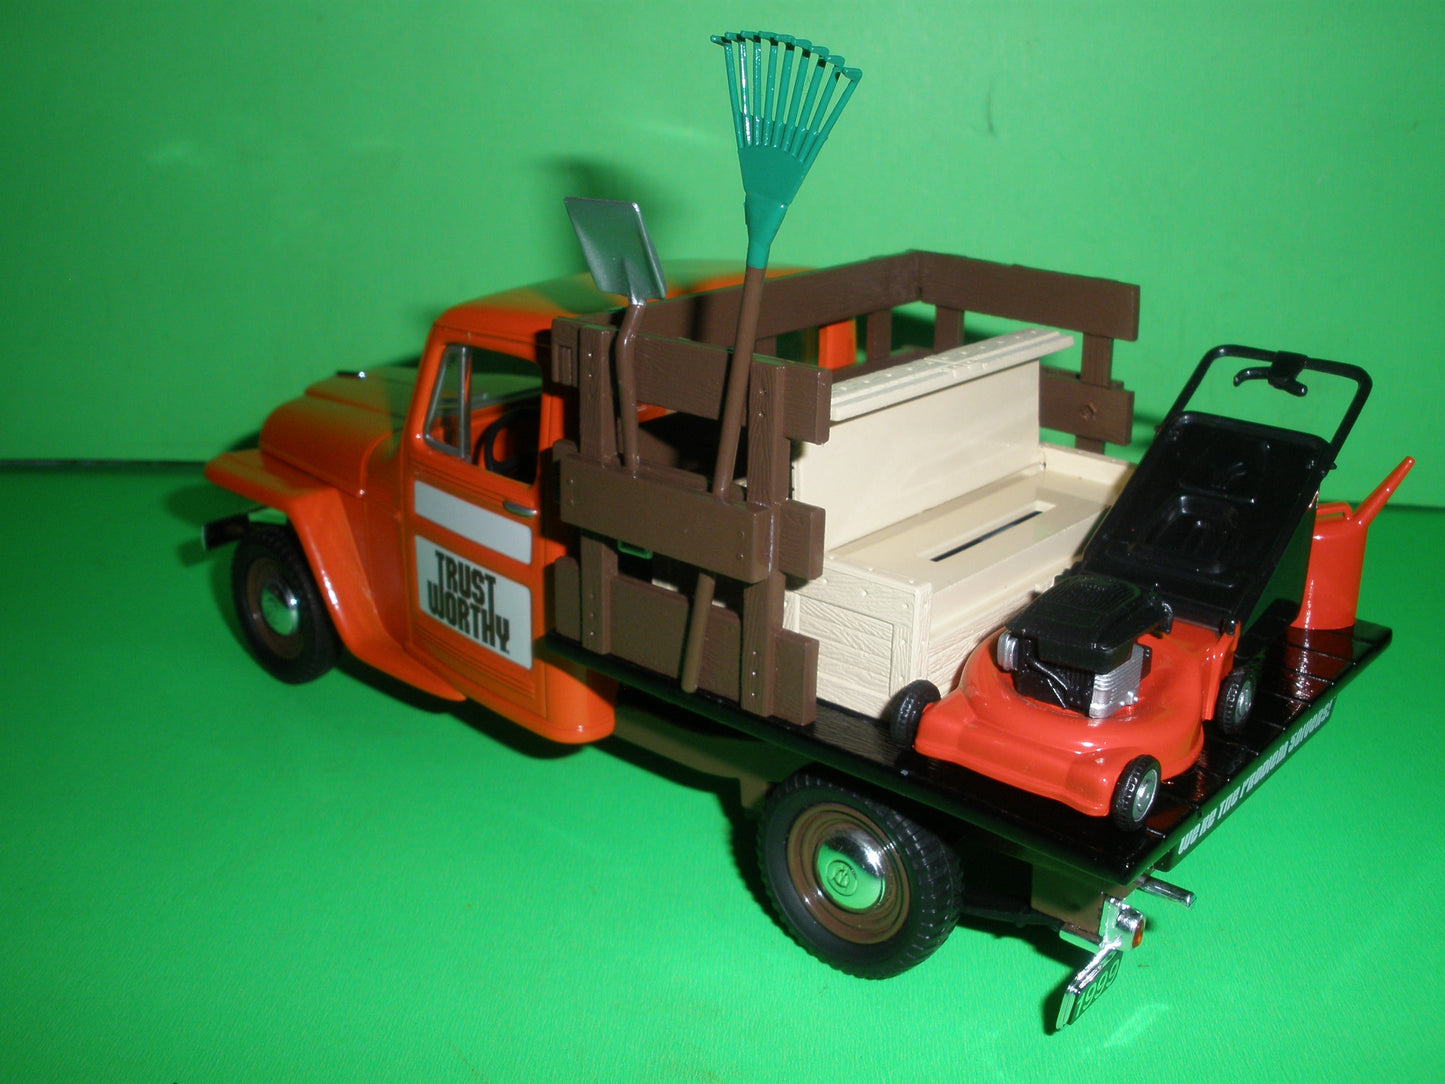 Trustworthy Hardware Stores 1953 Willys Jeep Stake Bed Truck